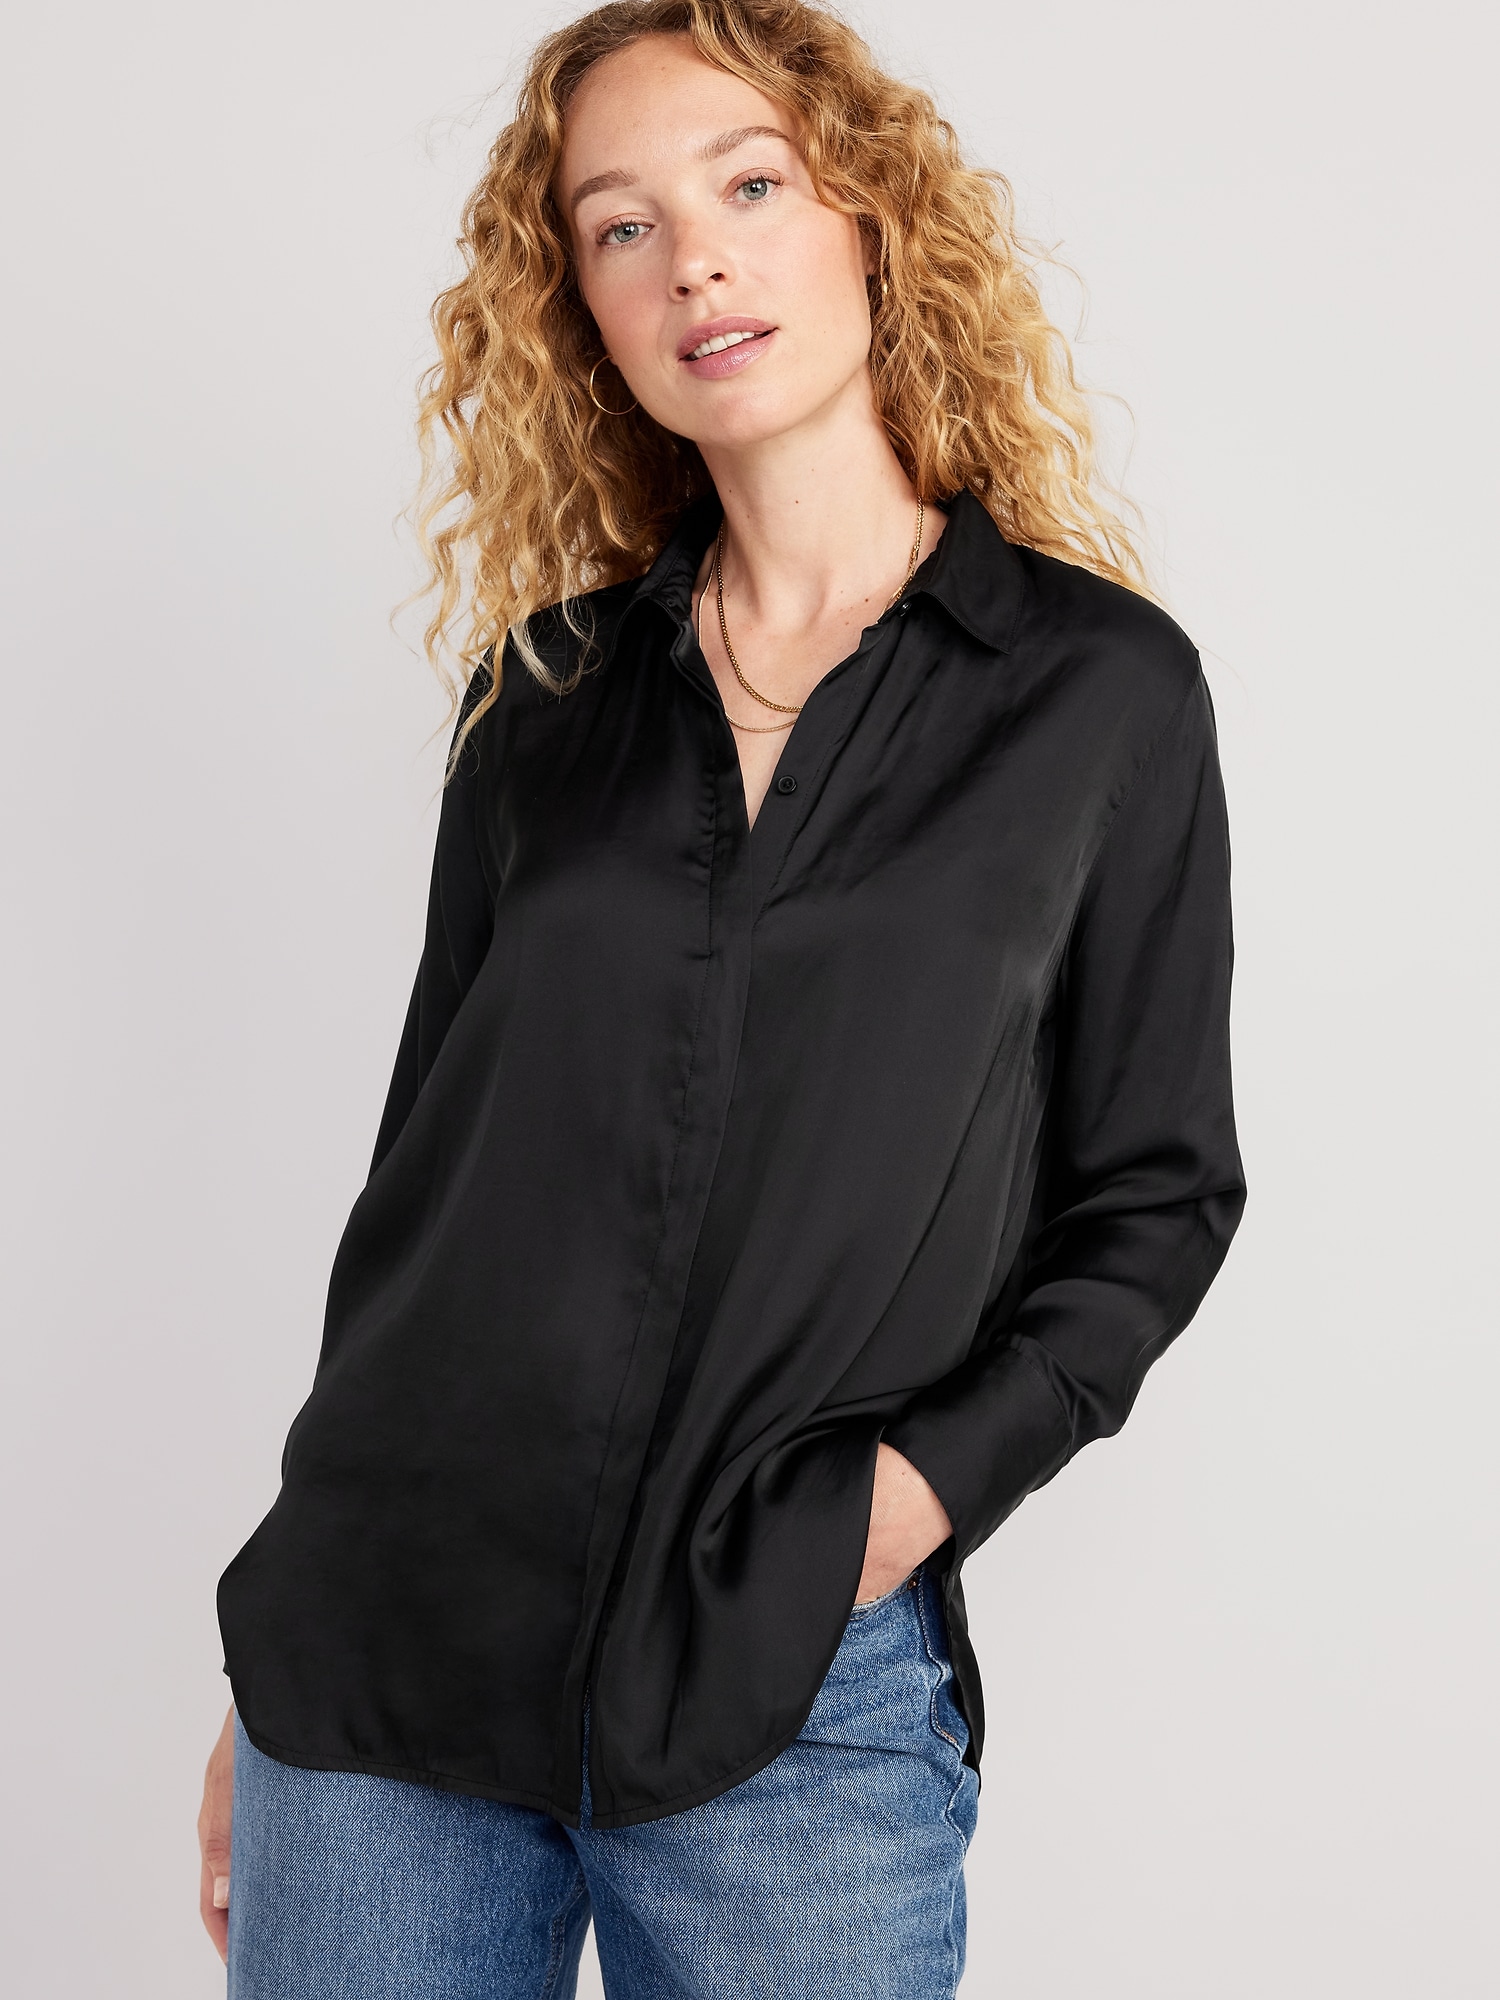 Loose Shirts for Women